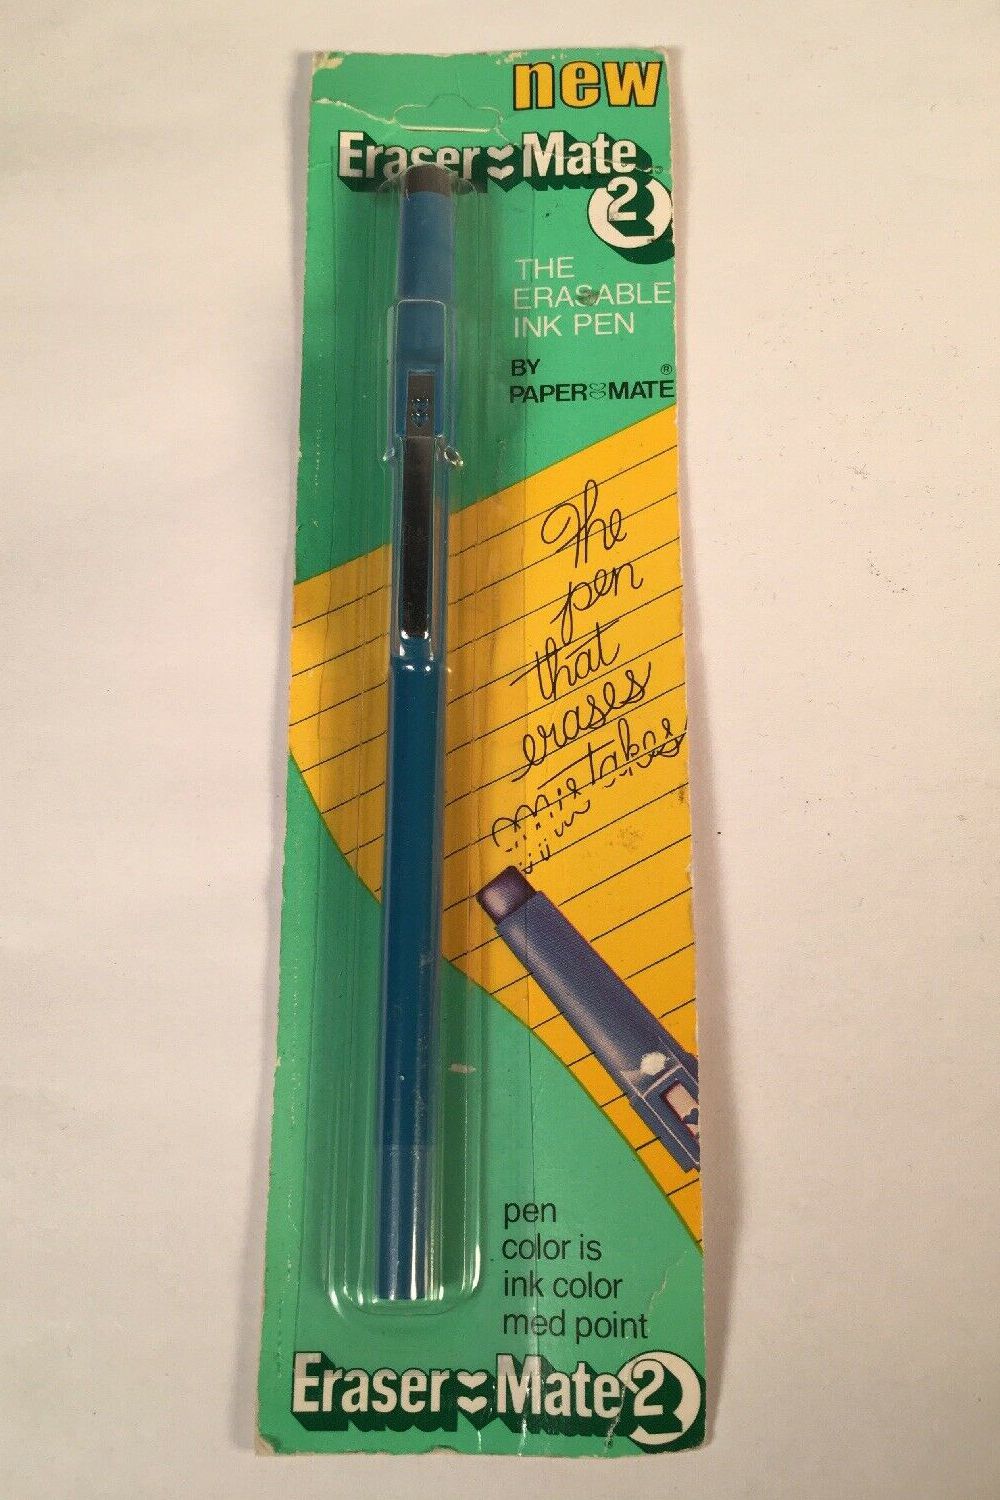 <p>Having the coolest school supplies has always been a status symbol, and in the '80s, there was nothing cooler than doing your work with an Eraser Mate. Paper Mate introduced its famous erasable-ink pen in 1979, and even though there was definite room for improvement (we still remember the smell and the runny ink), the novelty factor ensured their popularity with kids. Today, improved Eraser Mates <a href="https://www.walmart.com/ip/Paper-Mate-EraserMate-Erasable-Pens-Medium-Point-Black-4-Pack/17617405">are still in stores</a>, but they face stiff competition from better-reviewed <a href="https://www.walmart.com/ip/Pilot-FriXion-Clicker-Erasable-Gel-Ink-Retractable-Pen-Assorted-Ink-7mm-7-Pack-PIL31472/22477879">Pilot FriXion</a> erasable, gel-ink pens.</p>